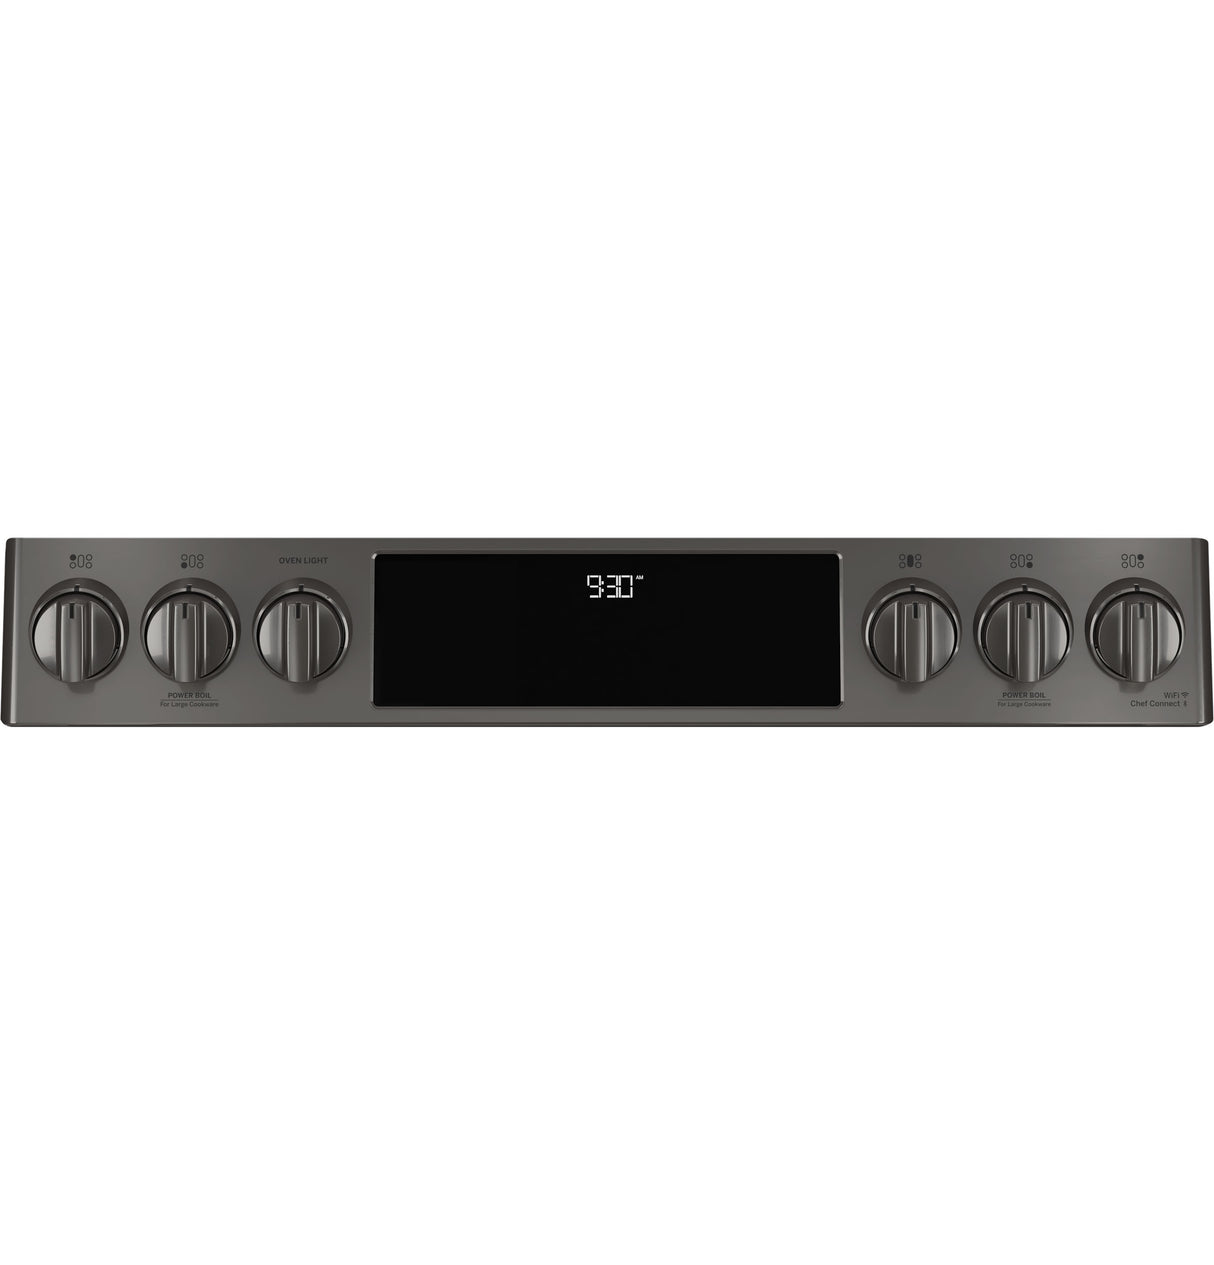 GE Profile(TM) 30" Smart Slide-In Front-Control Gas Range with No Preheat Air Fry - (PGS930BPTS)